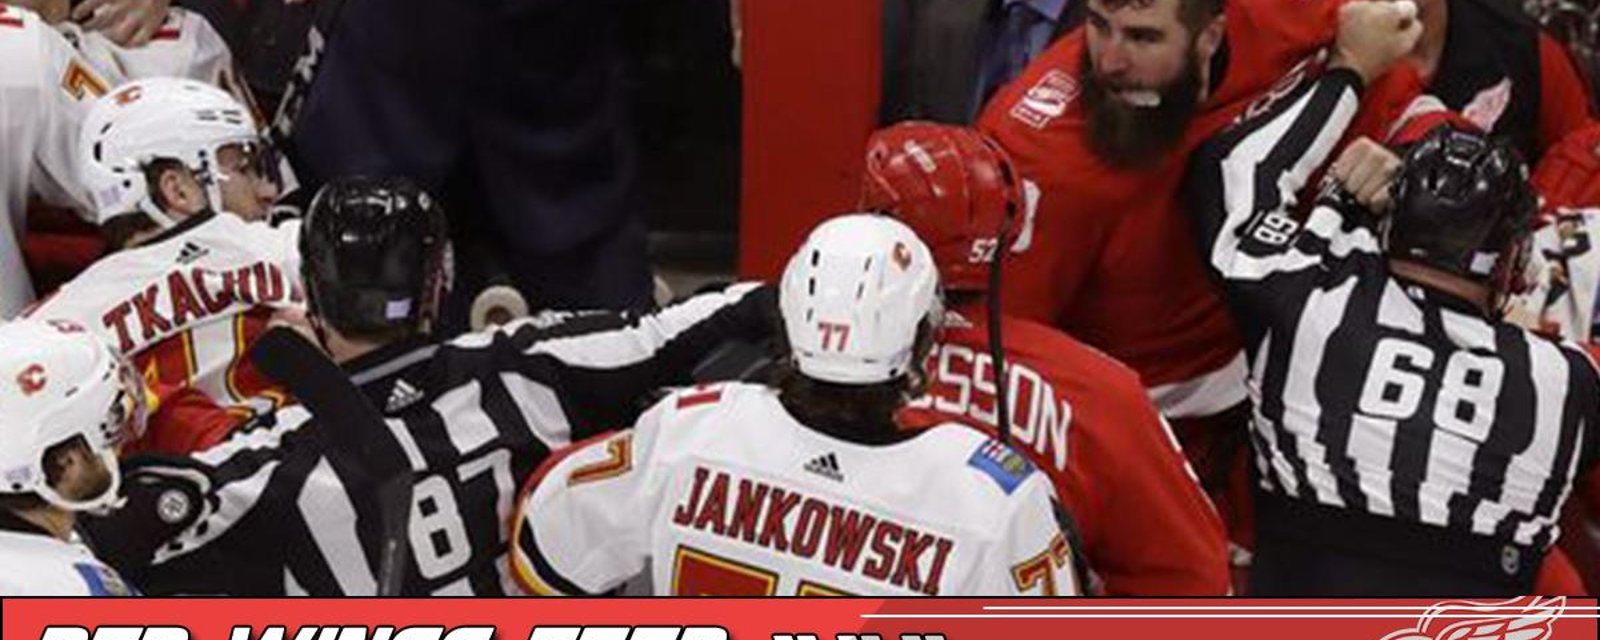 Witkowski and Blashill share their thoughts on 10 games suspension